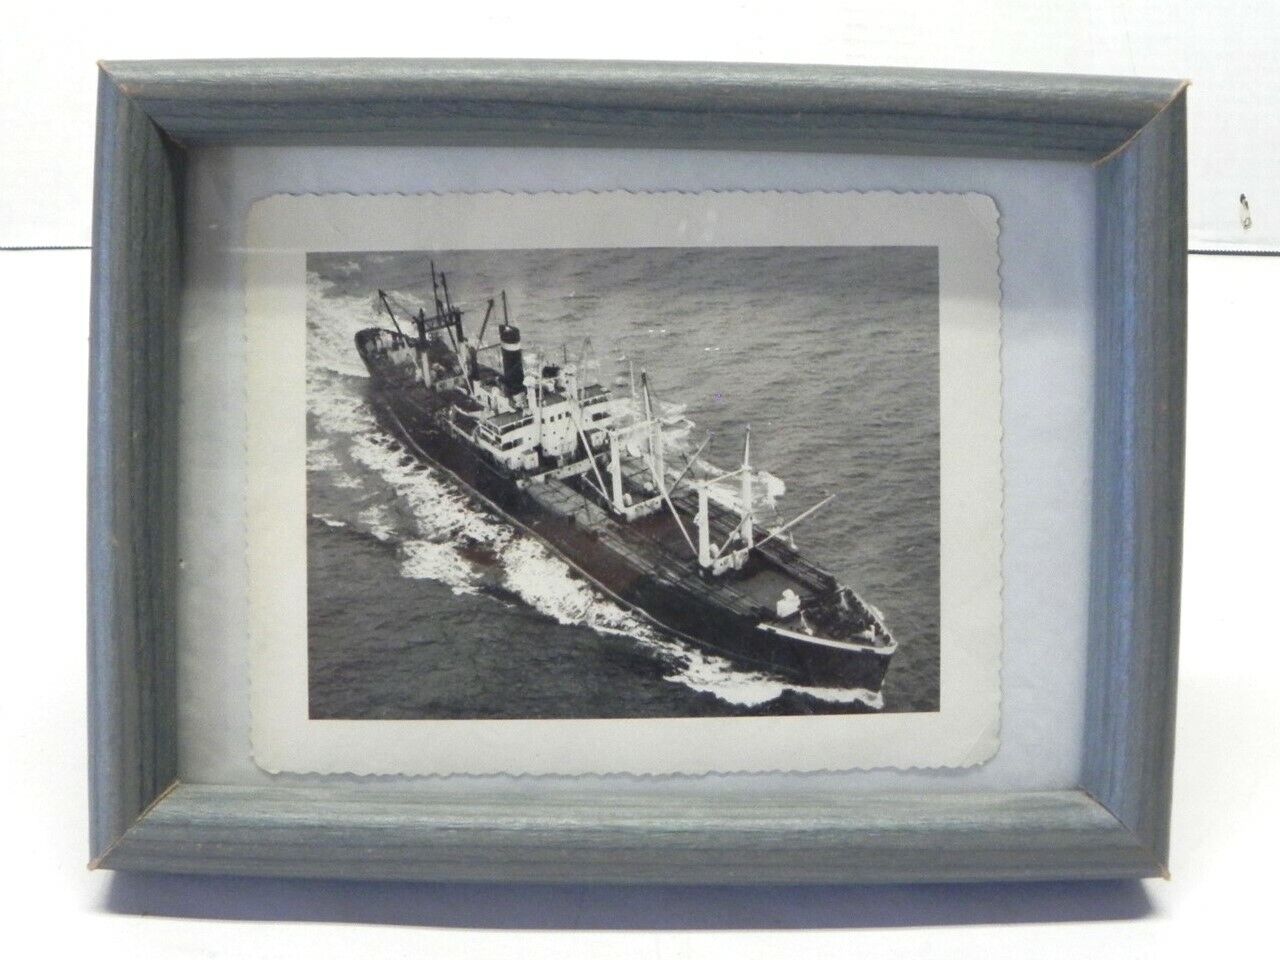 VINTAGE FRAMED PHOTOGRAPH OF THE S.S. SANTA JUANA MARCH 1951 SMALL BLUE FRAME 